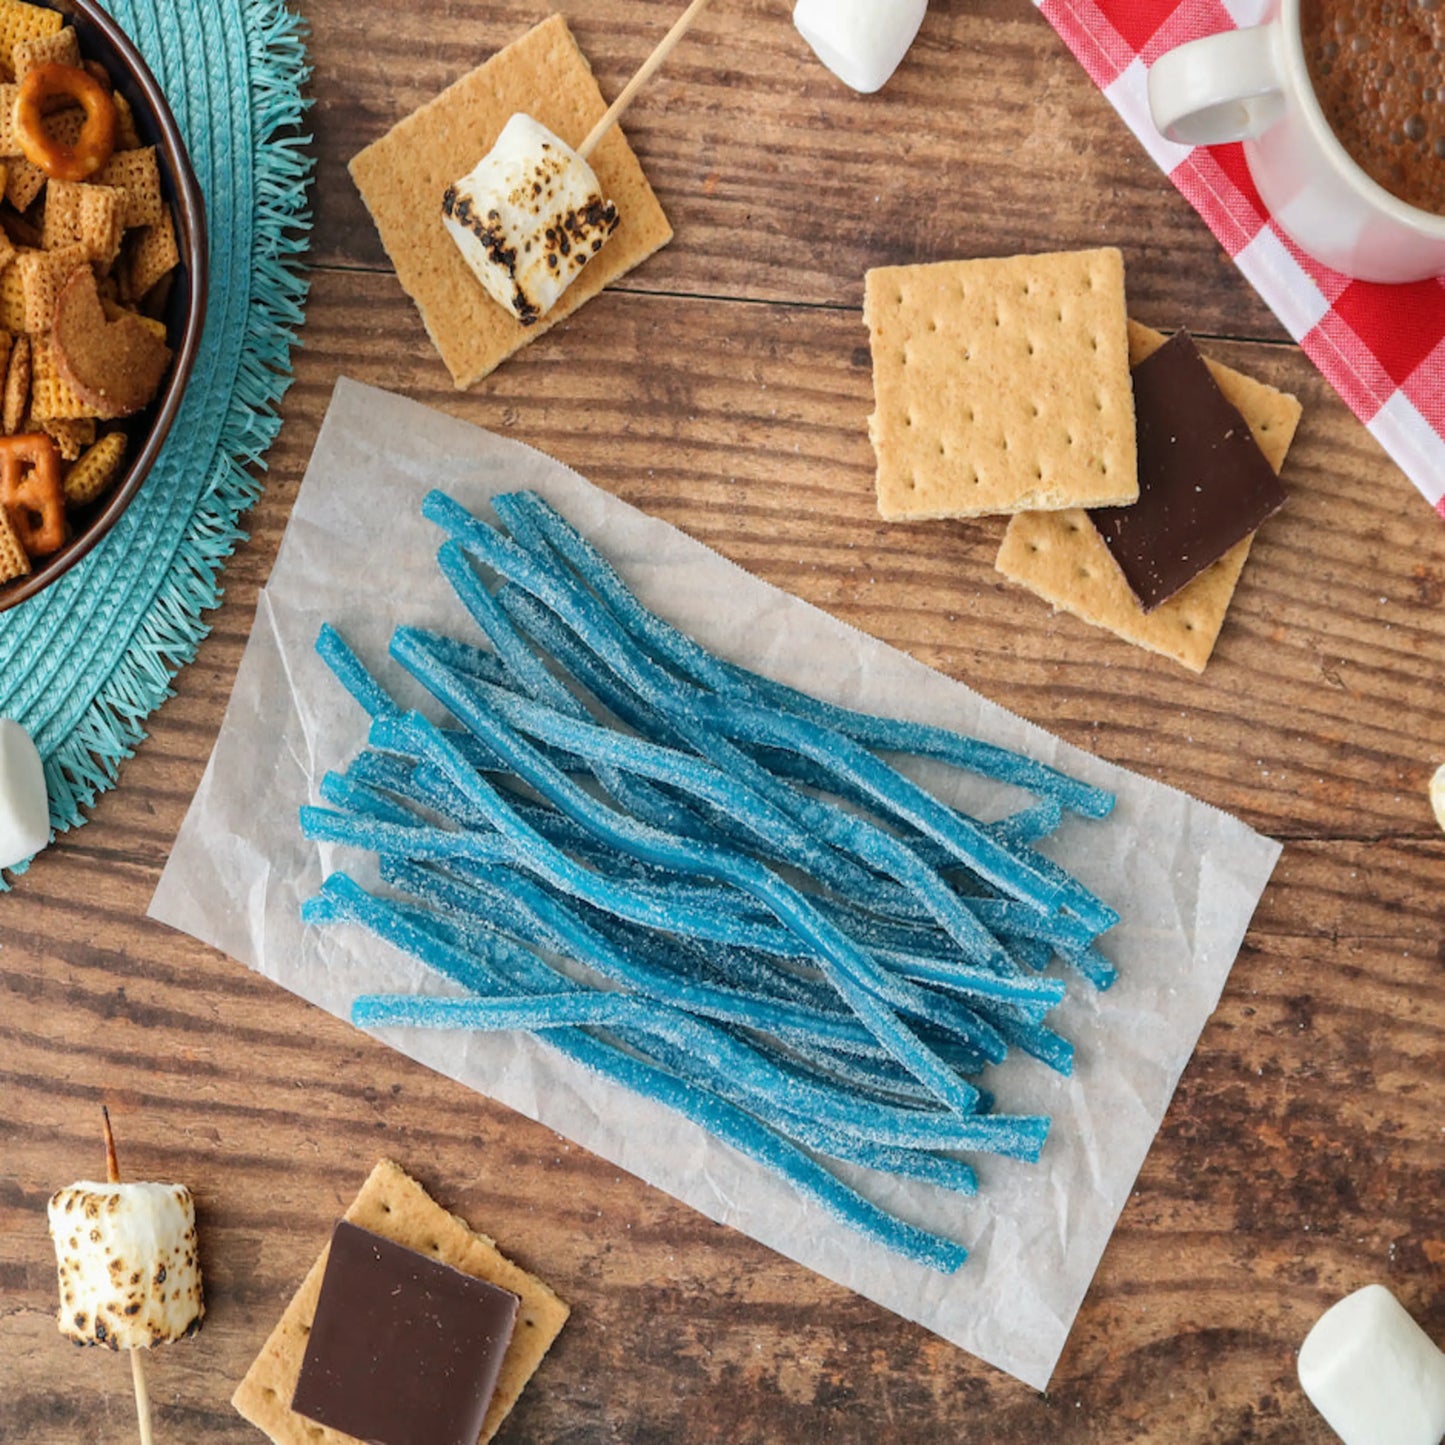 Sour Punch Blue Raspberry Straws Candy alongside s'mores supplies